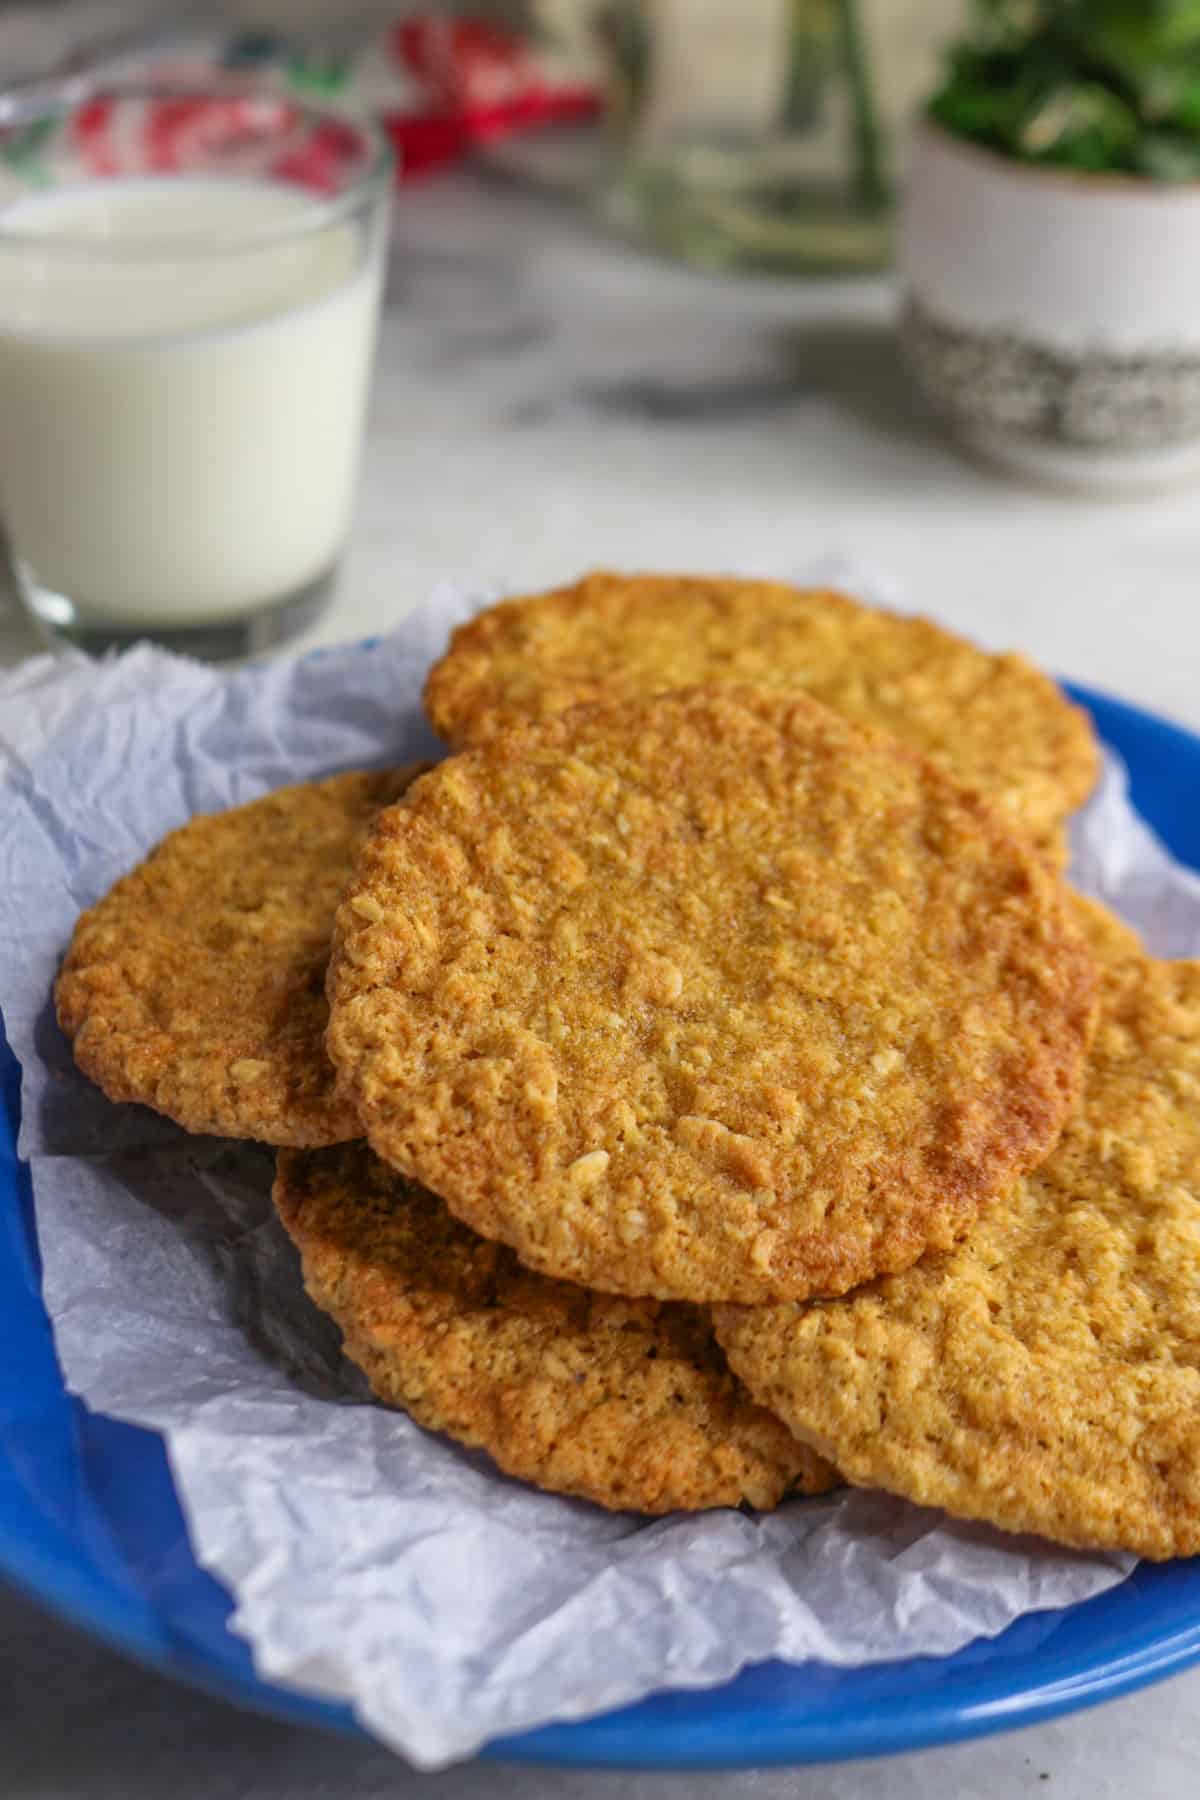 Coconut flour oatmeal cookies on a blue plate with a glass of milk behind it.